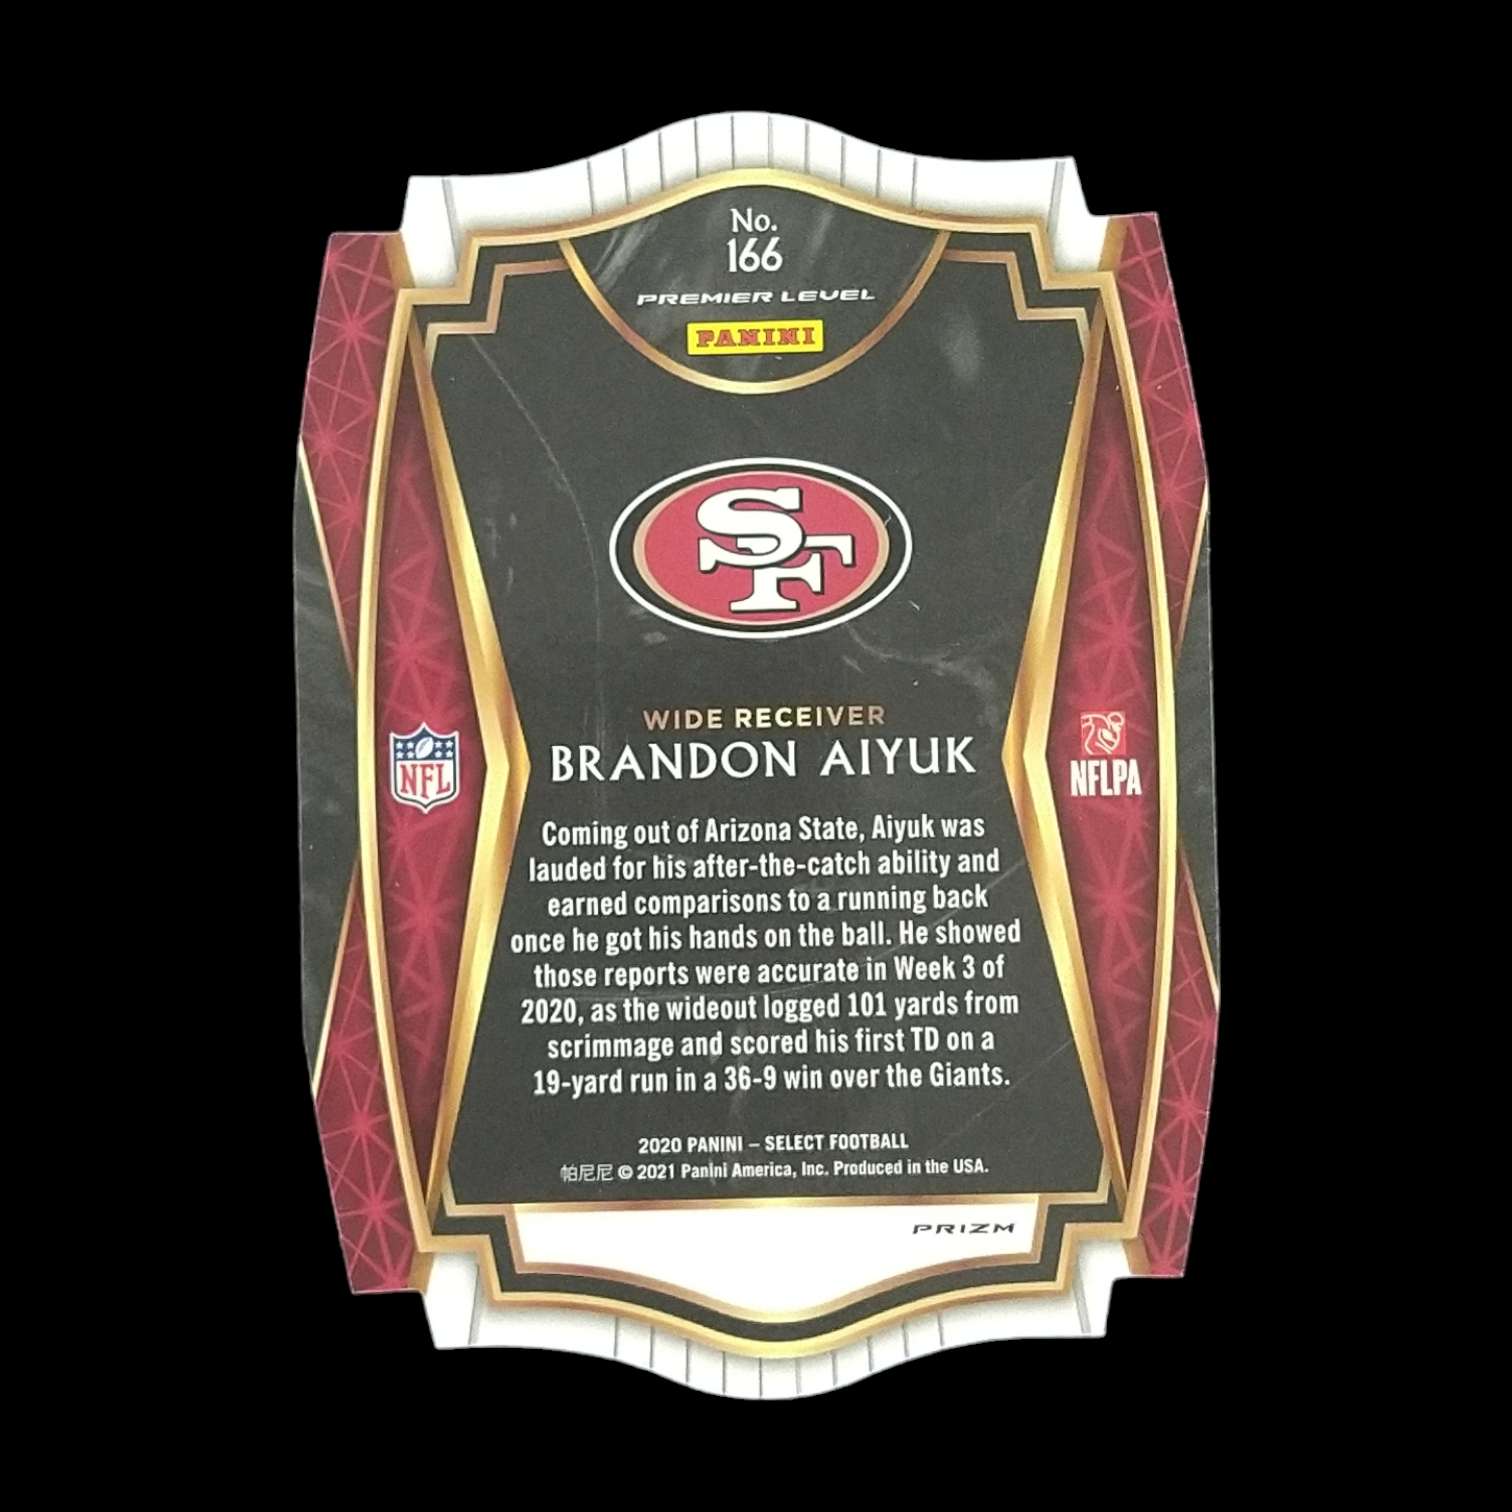 Brandon Aiyuk Rookie Card 2020 NFL Panini Rare Red Prizm Holo Patch SF 49rs  Star Rookie WR Sensation Birthday Gift Idea Mint Collectible